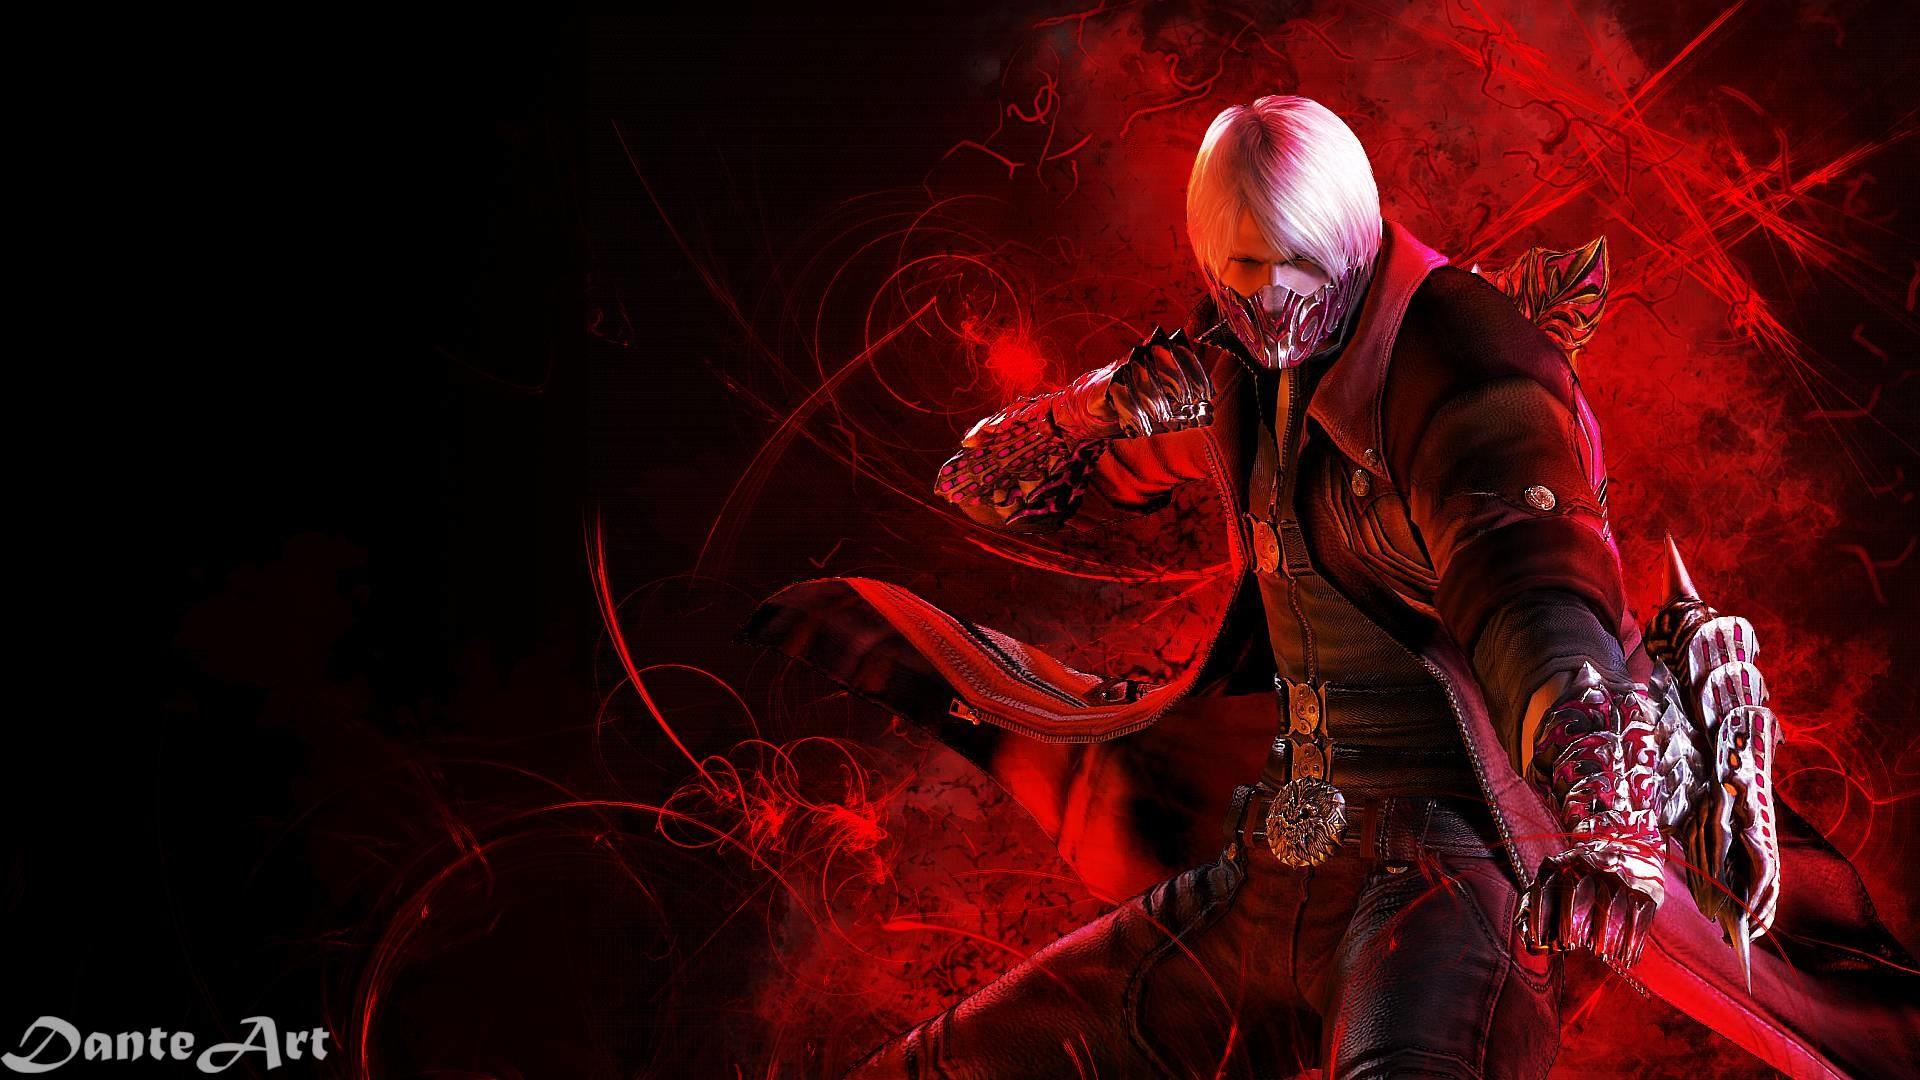 Dante Devil May Cry Wallpaper background picture